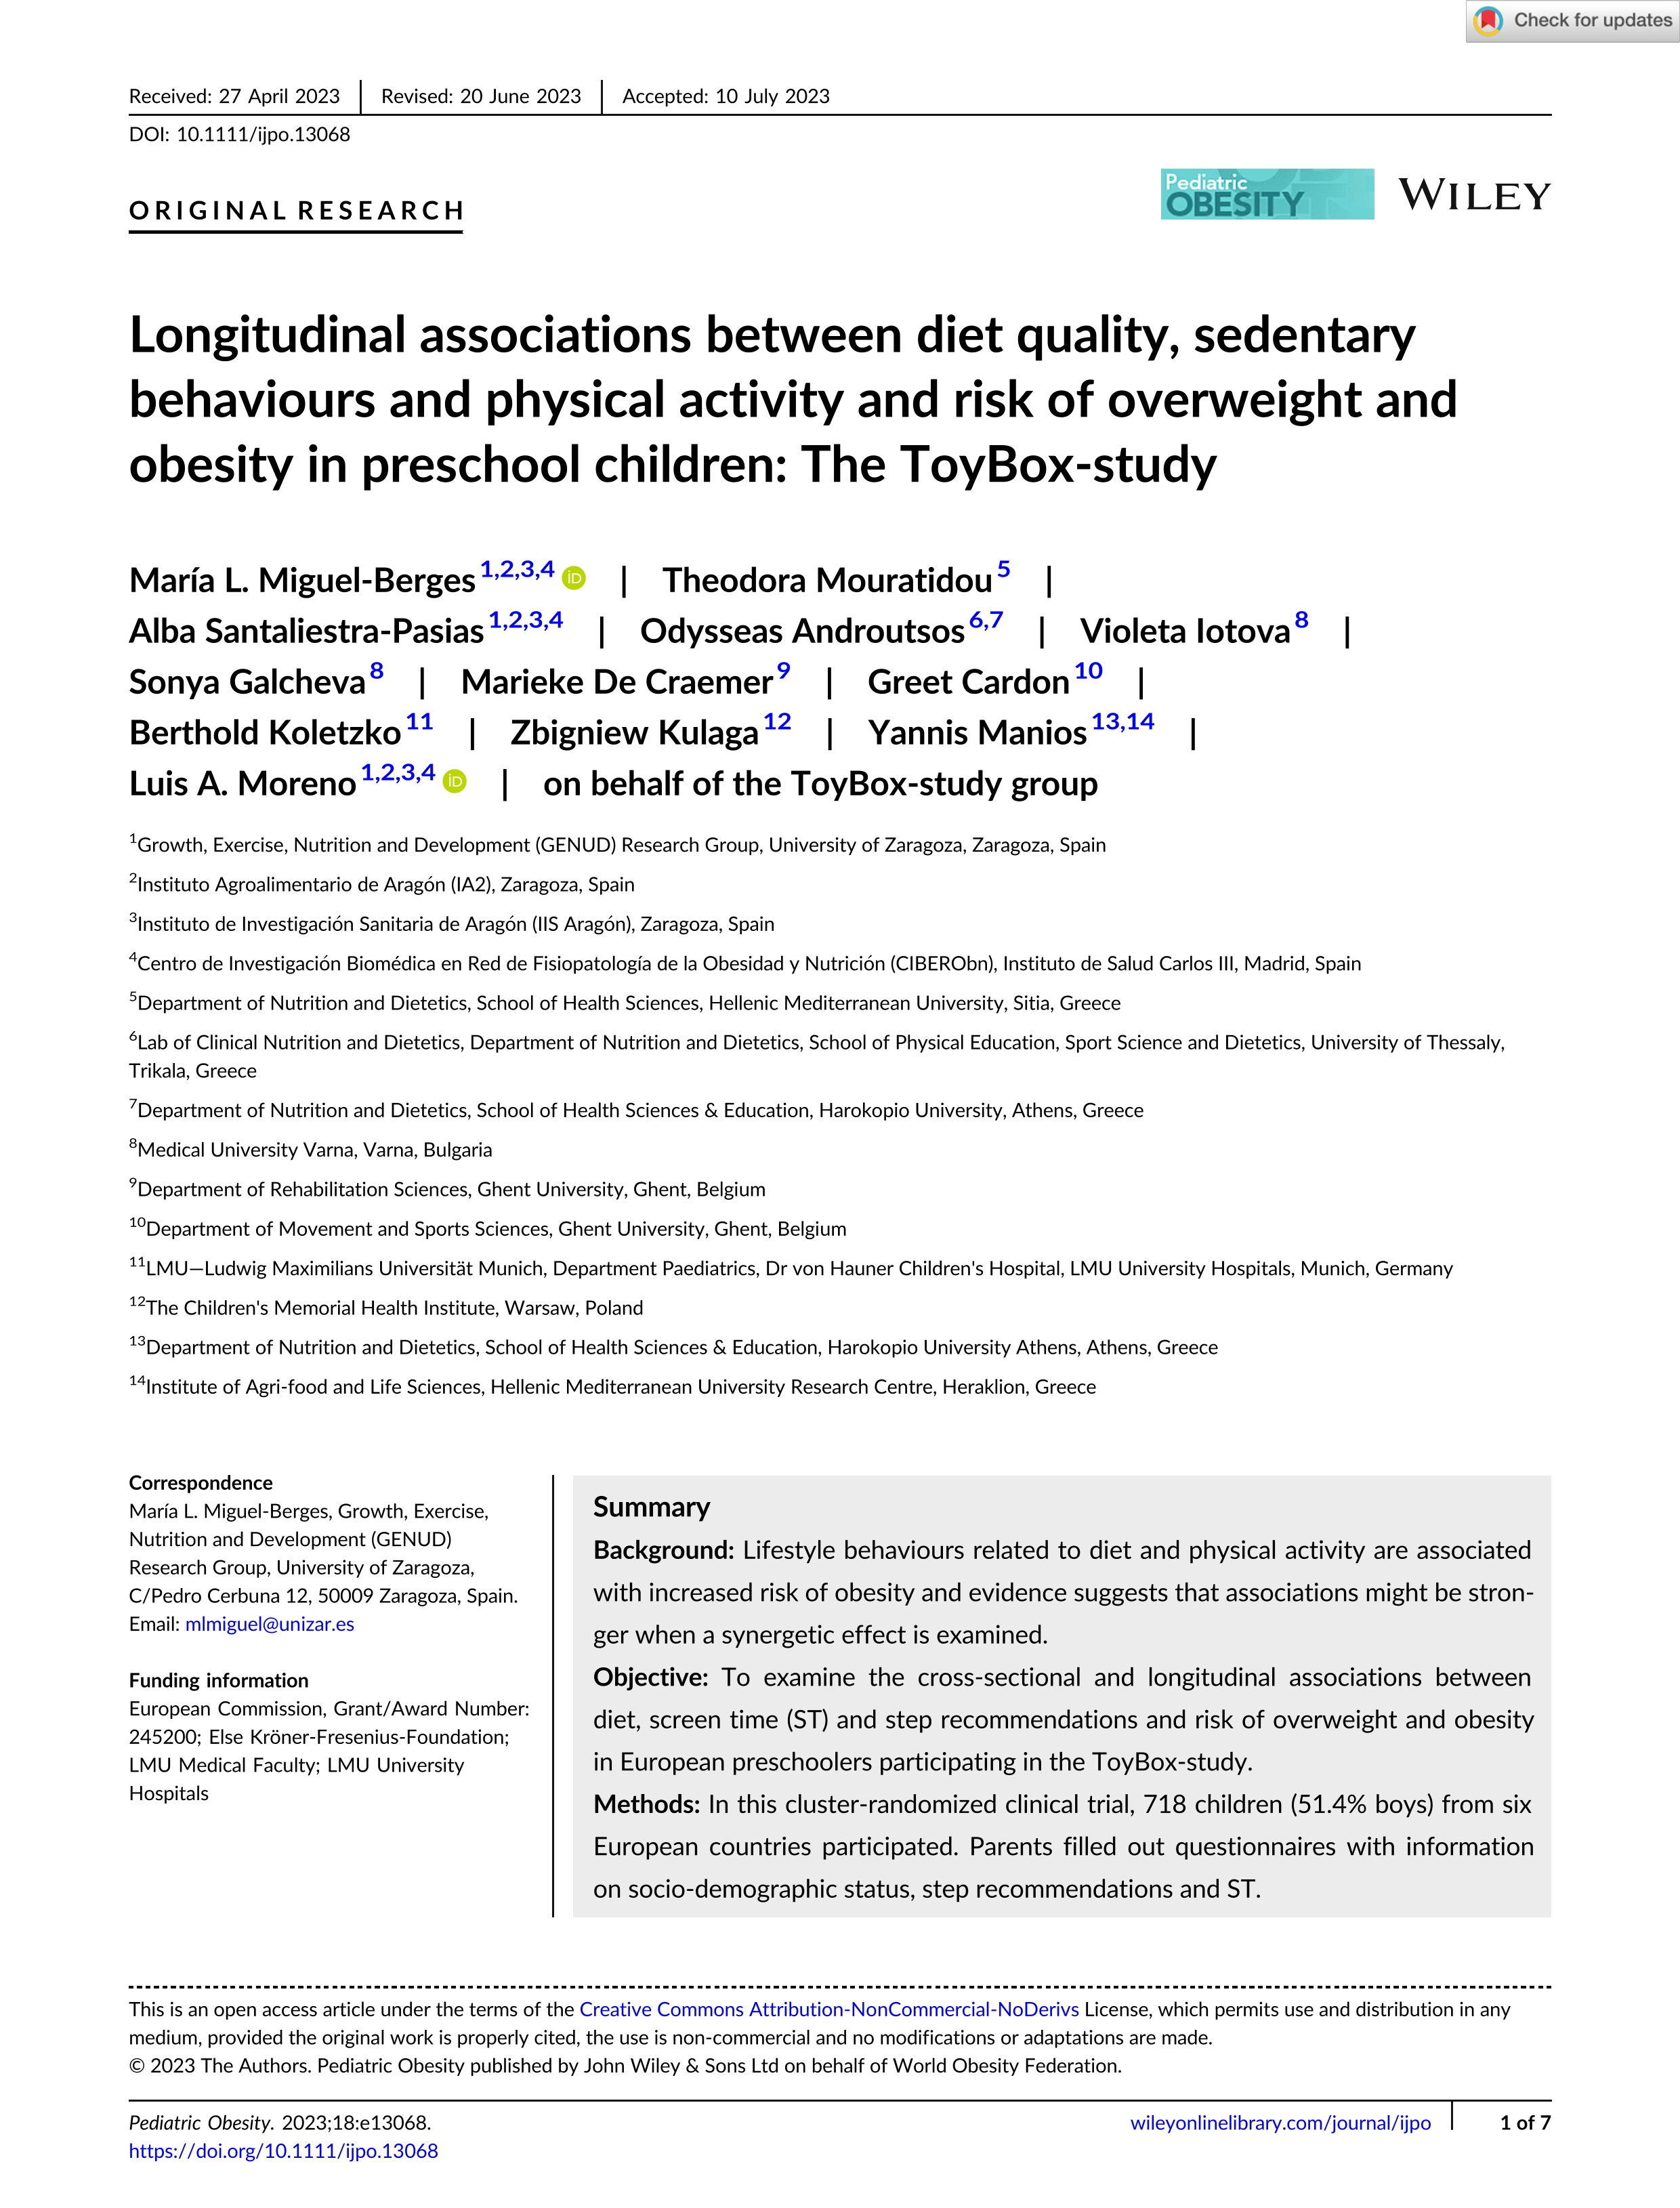 Longitudinal associations between diet quality, sedentary behaviours and physical activity and risk of overweight and obesity in preschool children: The ToyBox-study